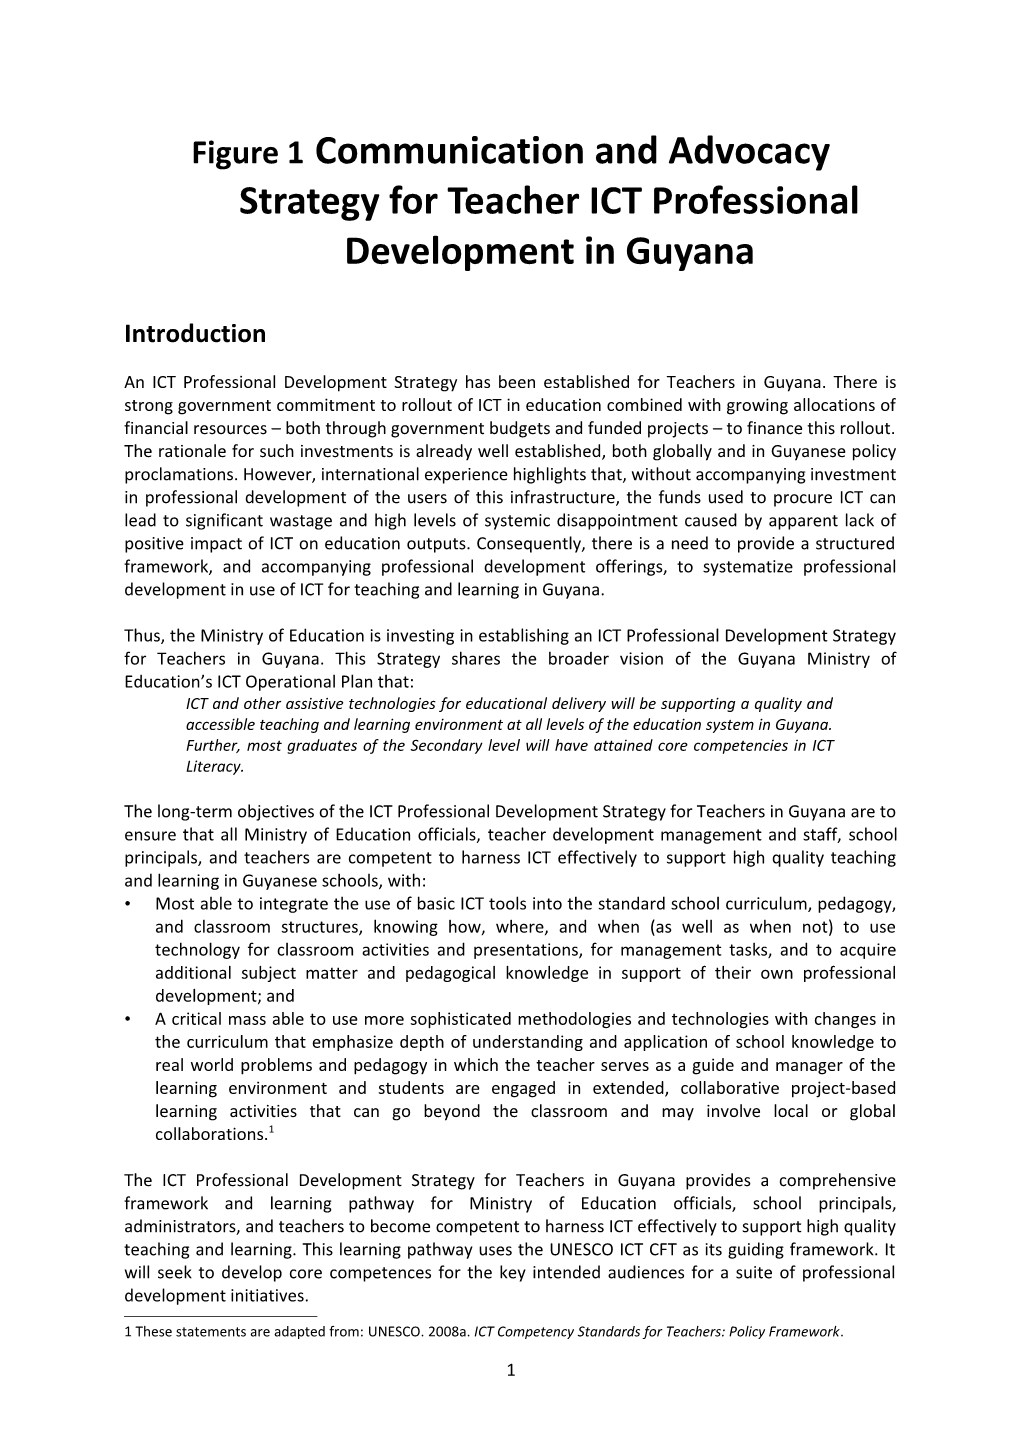 Communication and Advocacy Strategy for Teacher ICT Professional Development in Guyana